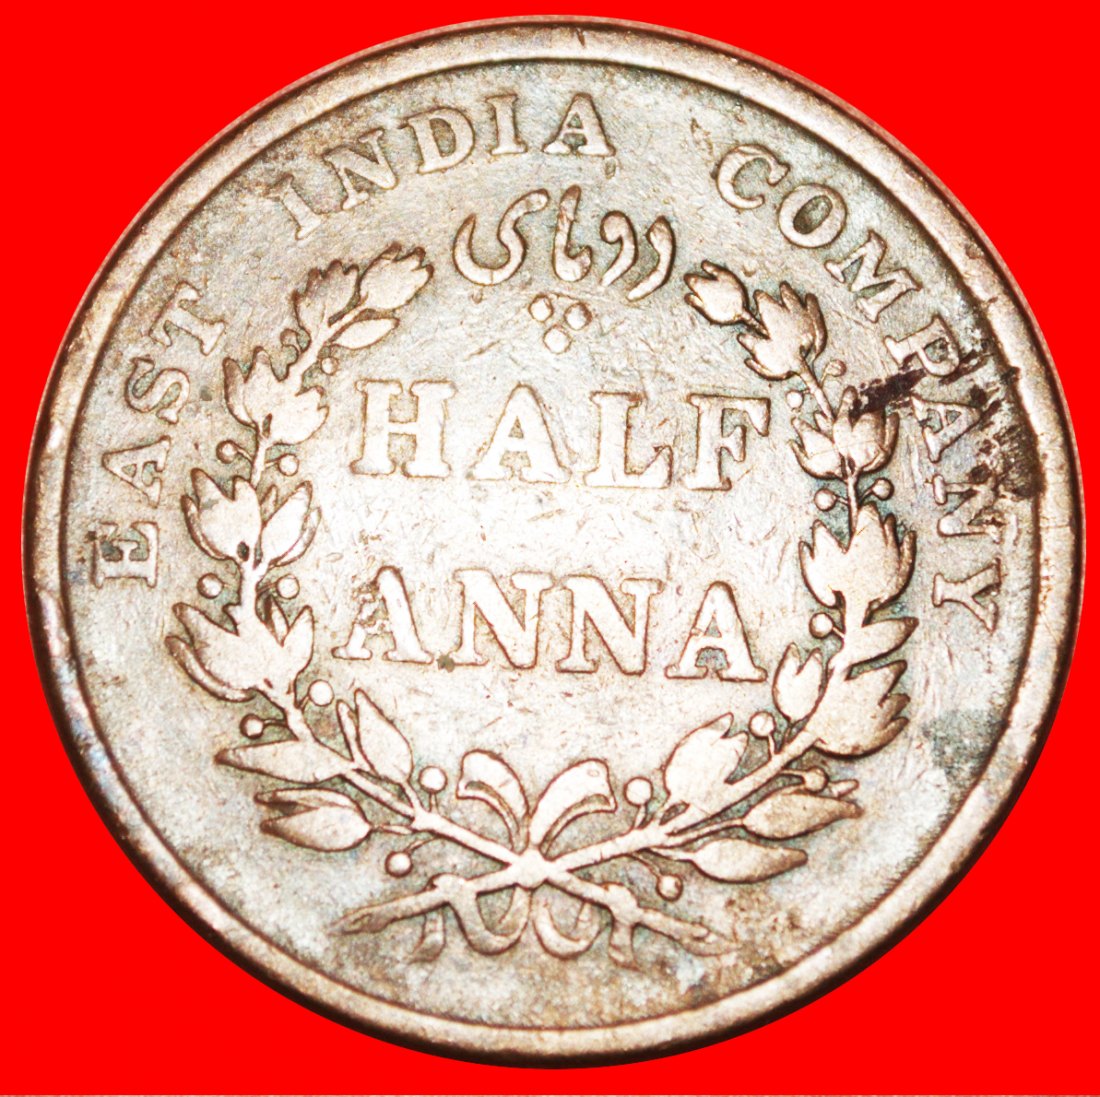  · LIONS (1835-1845): EAST INDIA COMPANY ★ 1/2 ANNA 1845! UNCOMMON! LOW START ★ NO RESERVE!   